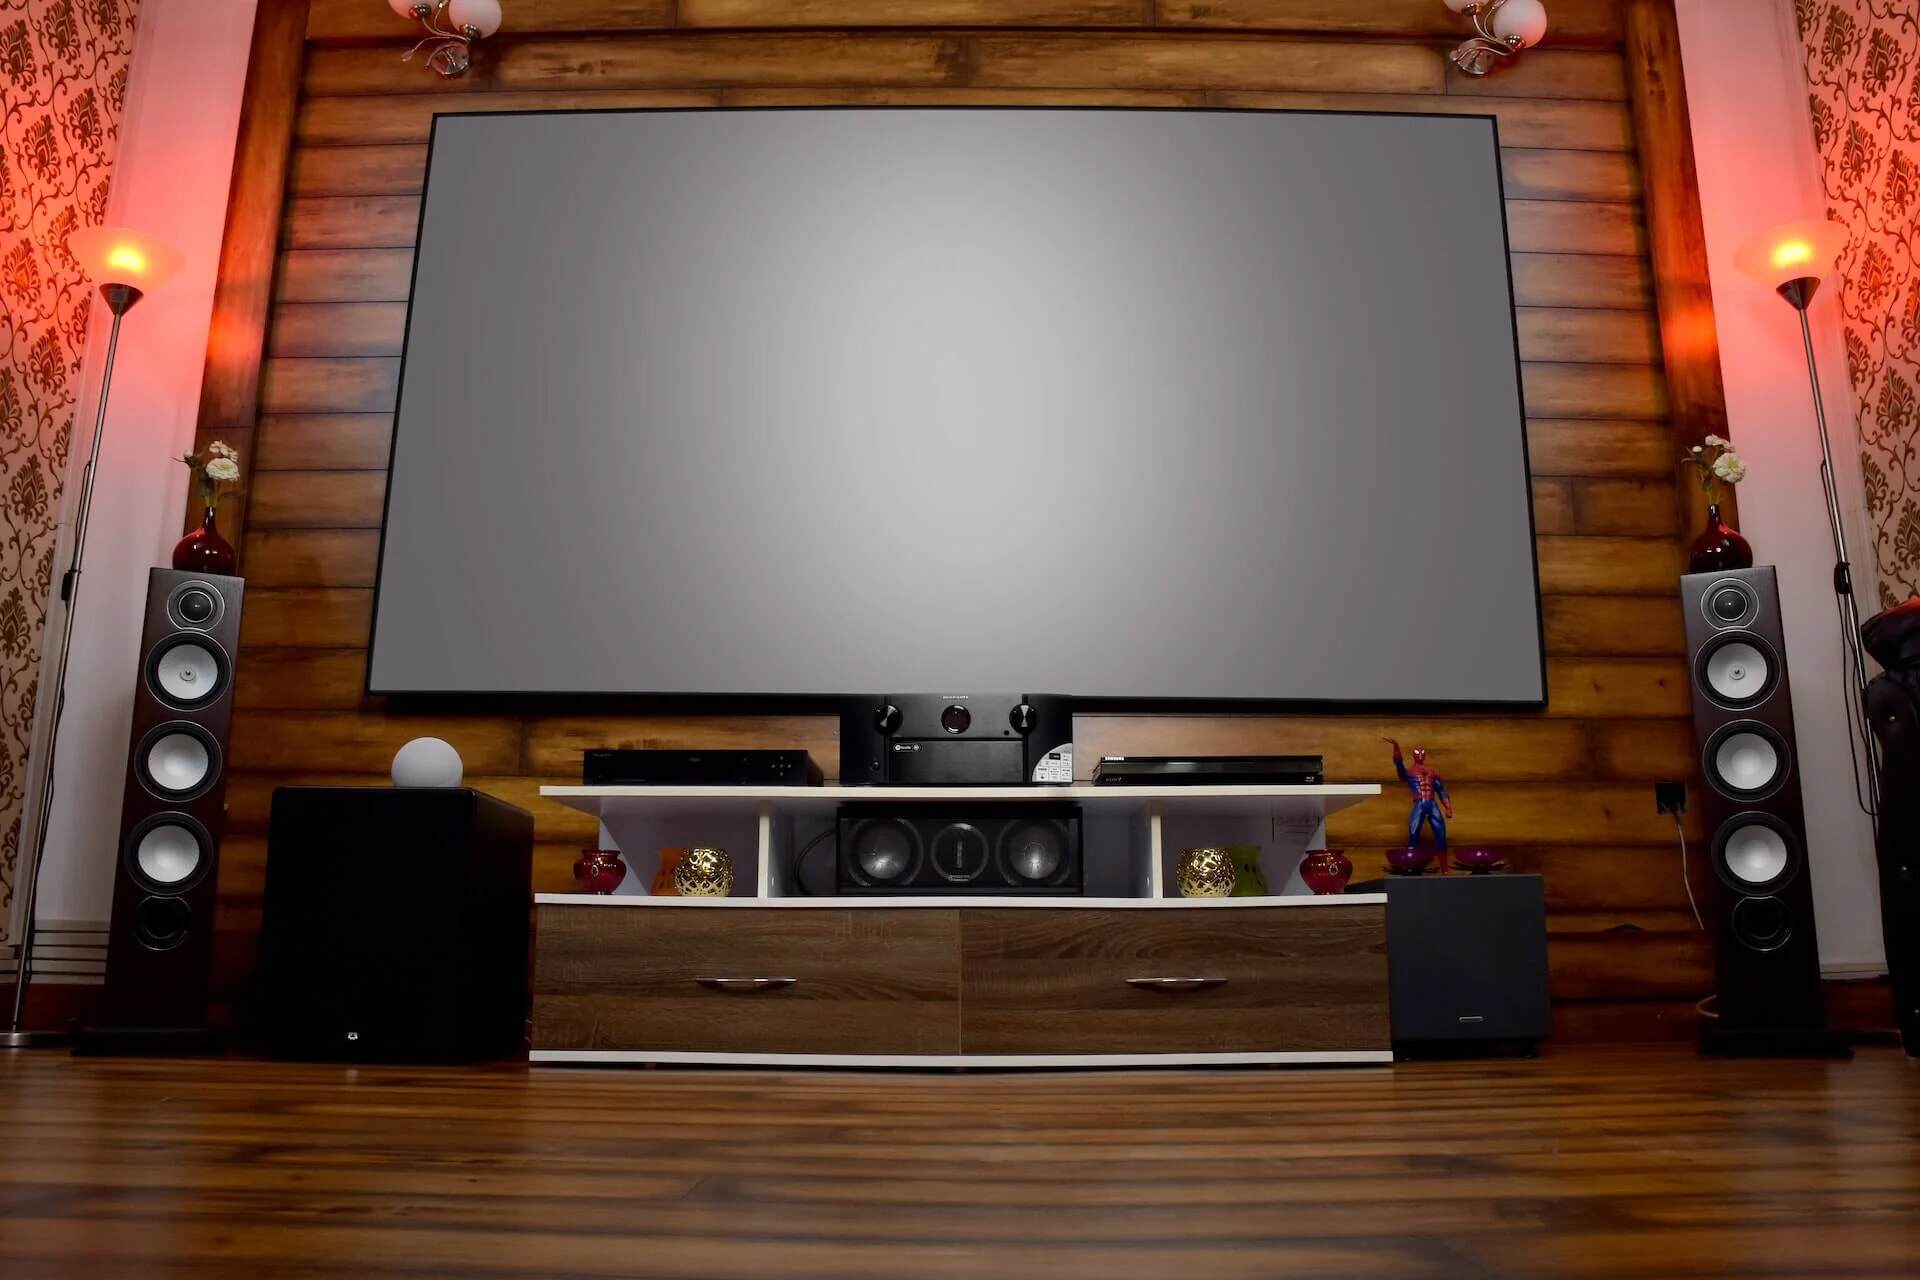 instructions-on-how-to-hook-up-an-innovative-iv-11-surround-sound-system-to-tv